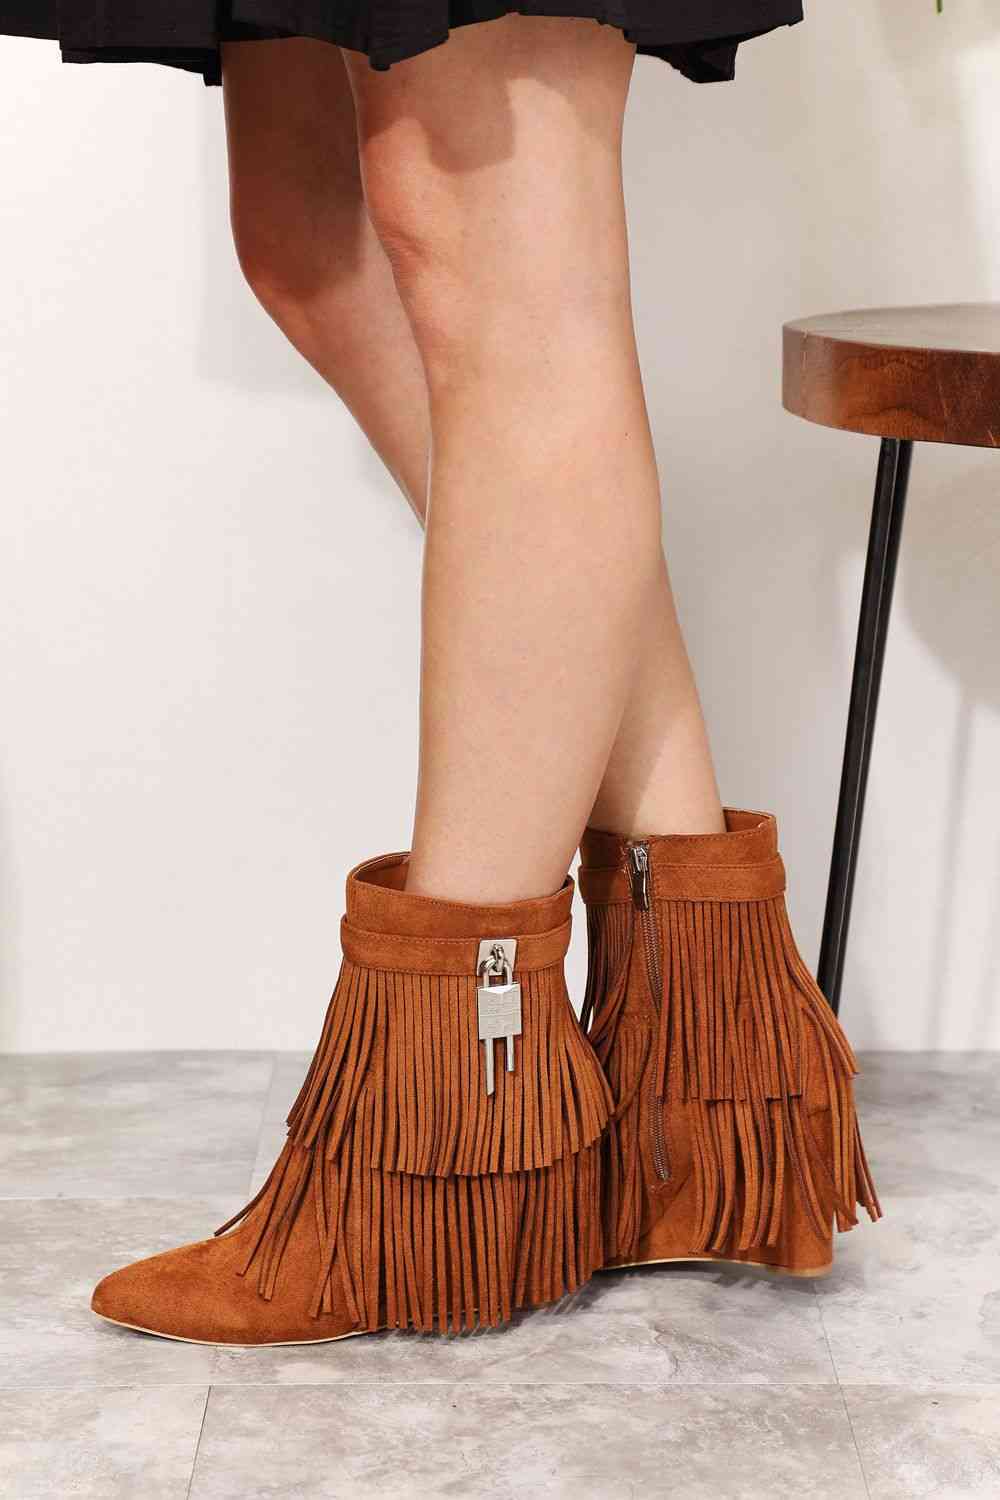 A woman's Legend Women's Tassel Wedge Heel Ankle Booties in a pair of brown fringe boots with an open shank design from Trendsi.